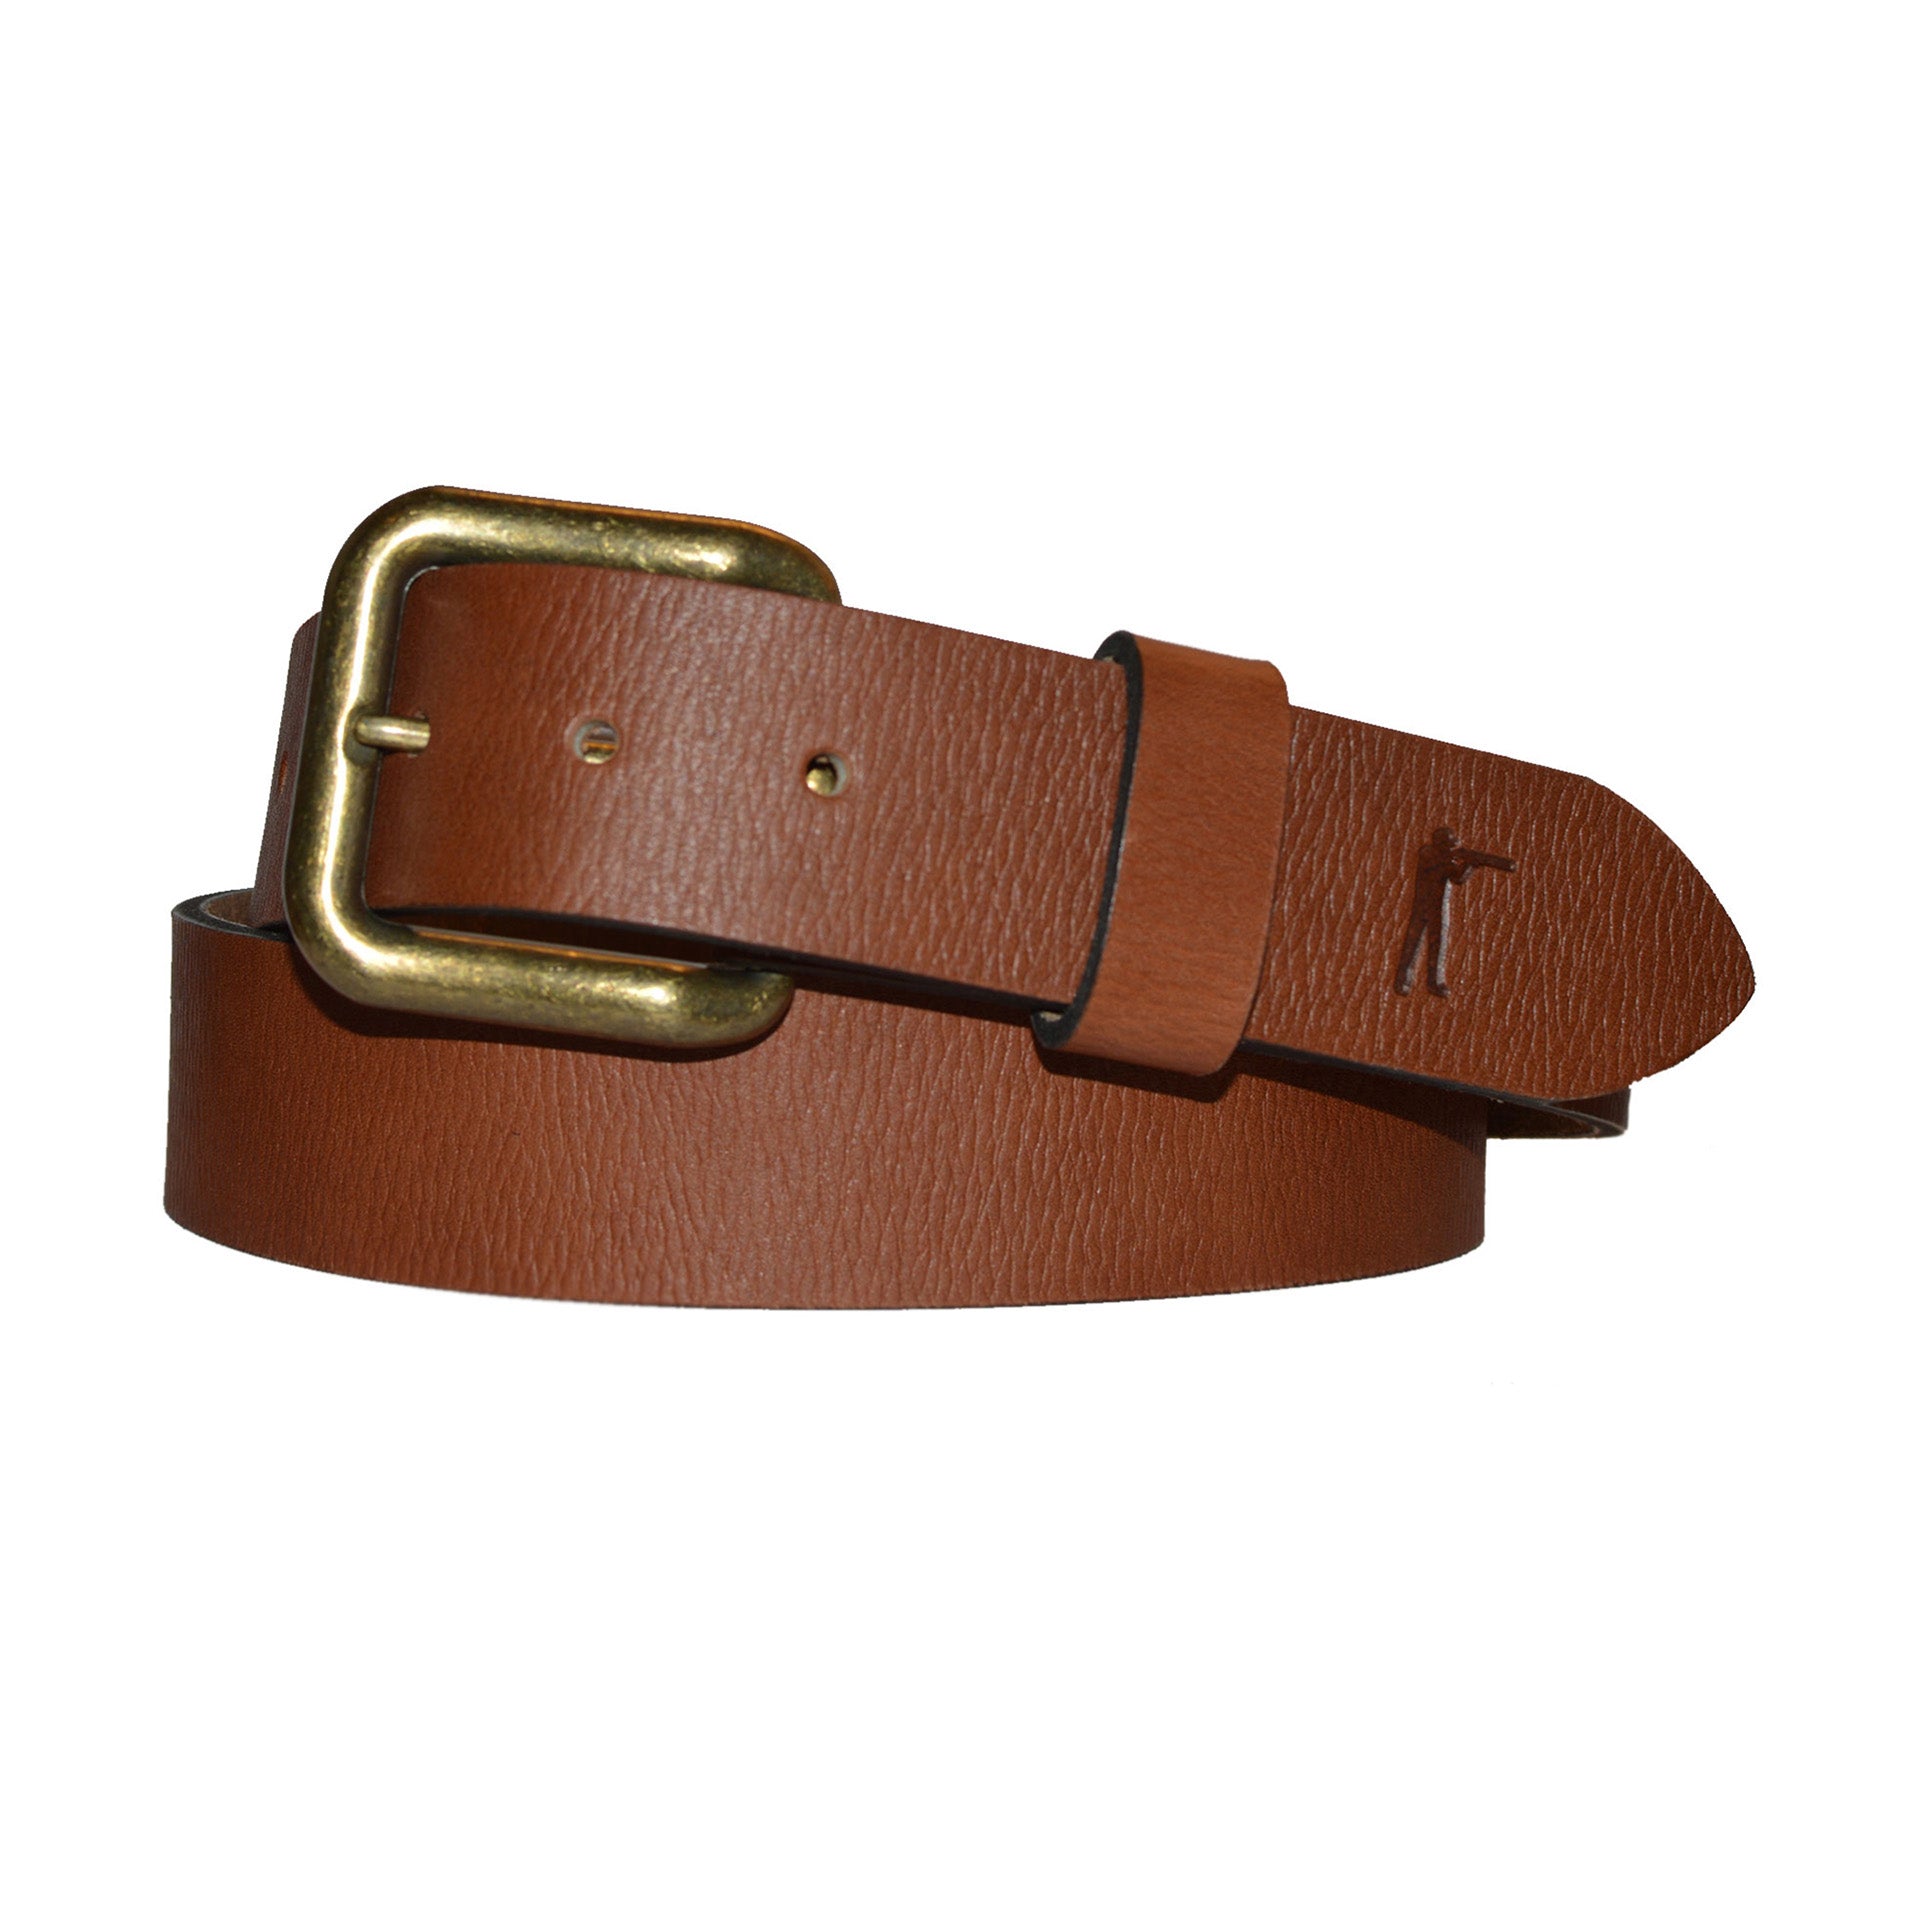 Last Belt You'll Ever Buy - Signature Leather | Ball and Buck